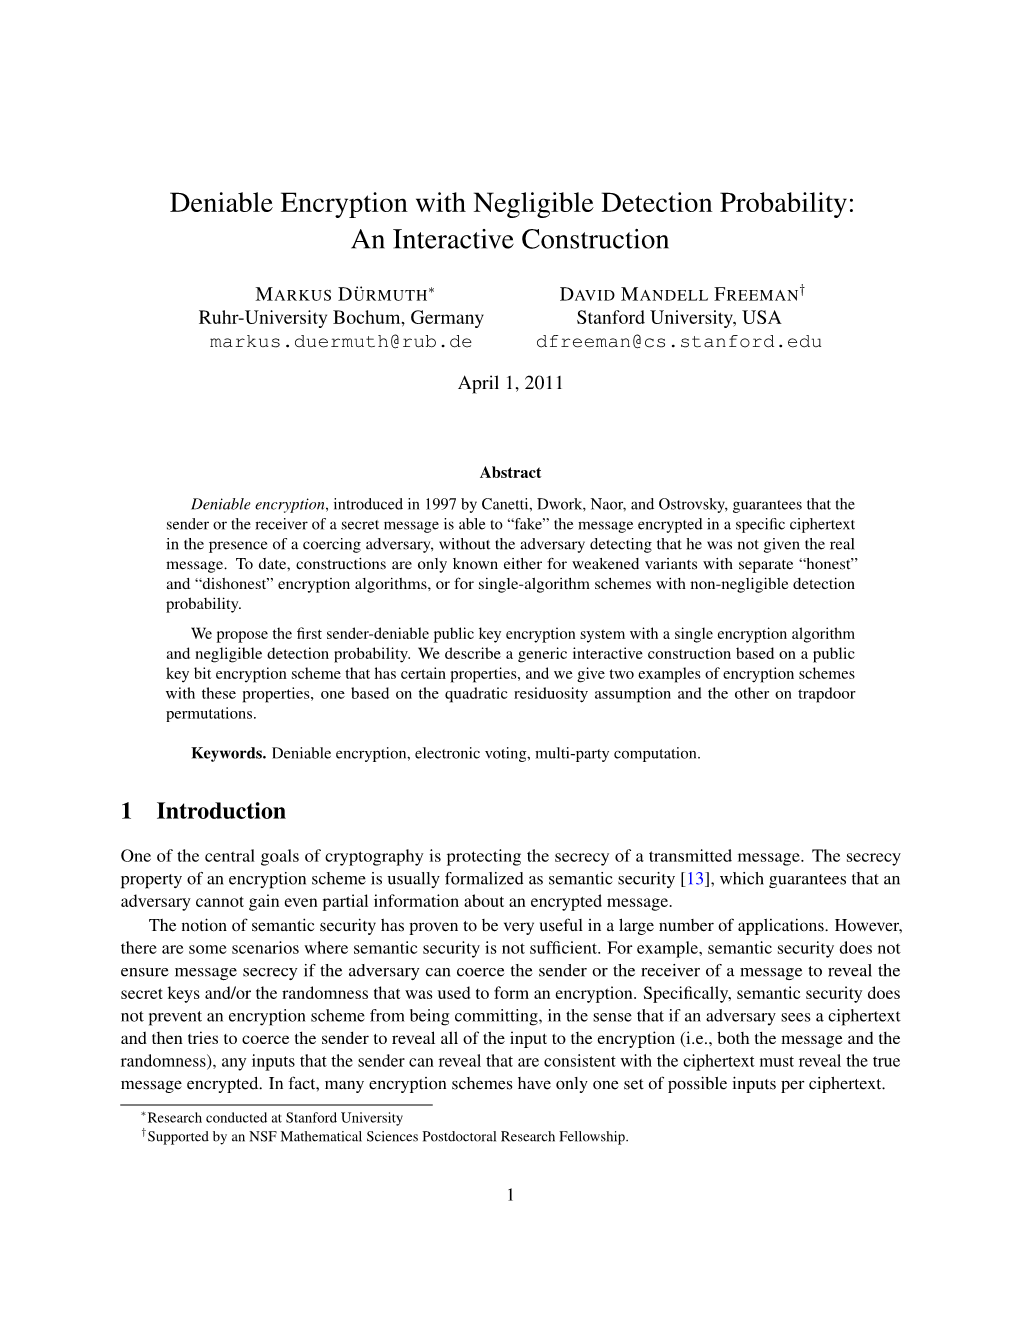 Deniable Encryption with Negligible Detection Probability: an Interactive Construction